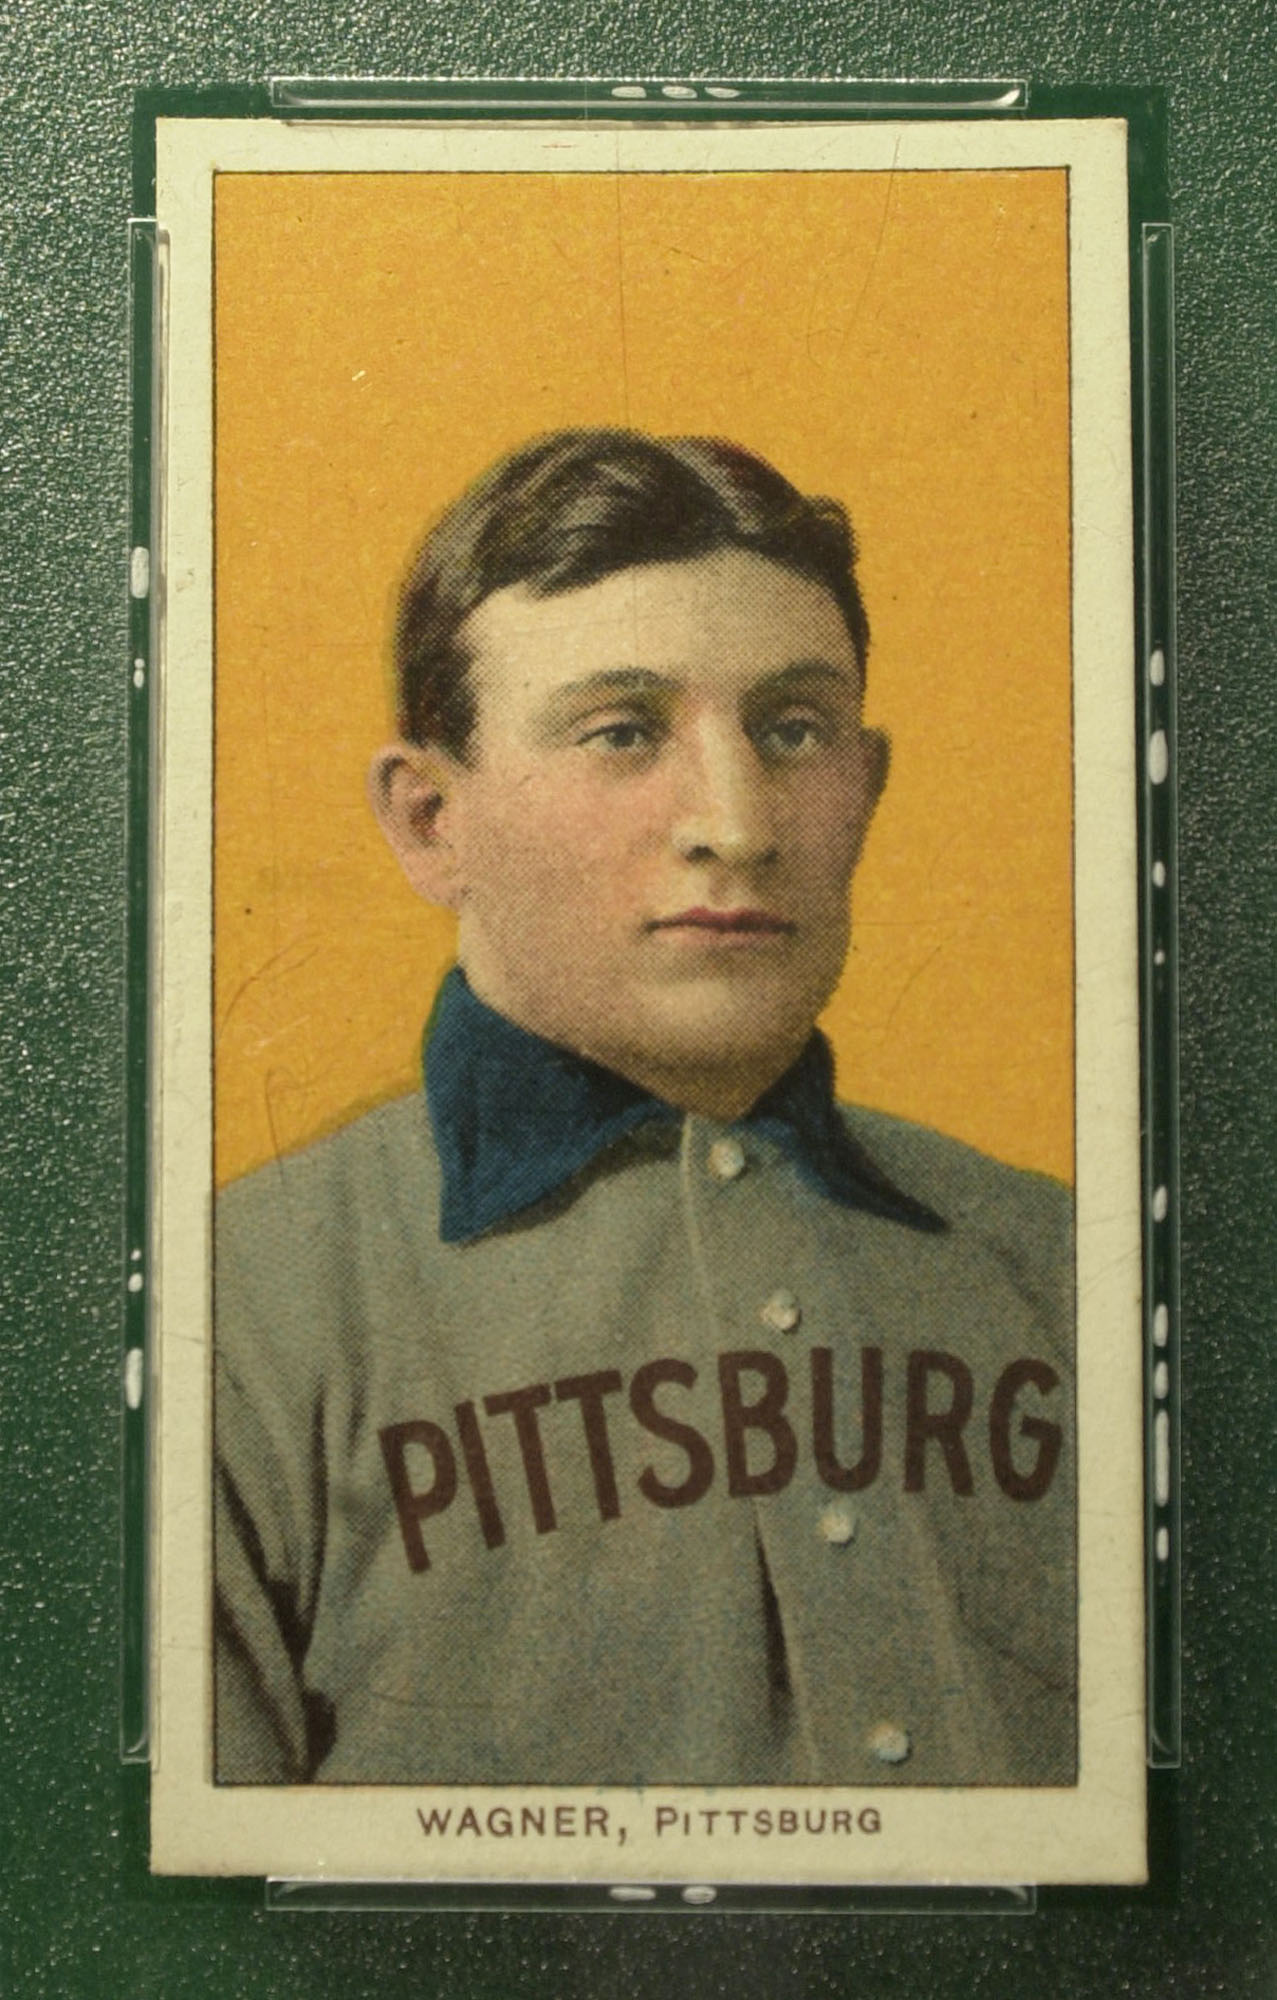 370565 02: The famous T206 Honus Wagner baseball card, is shown June 6, 2000 in New York City. The legendary baseball card will be auctioned on eBay beginning on July 5, 2000. (Photo by Chris Hondros/Newsmakers)